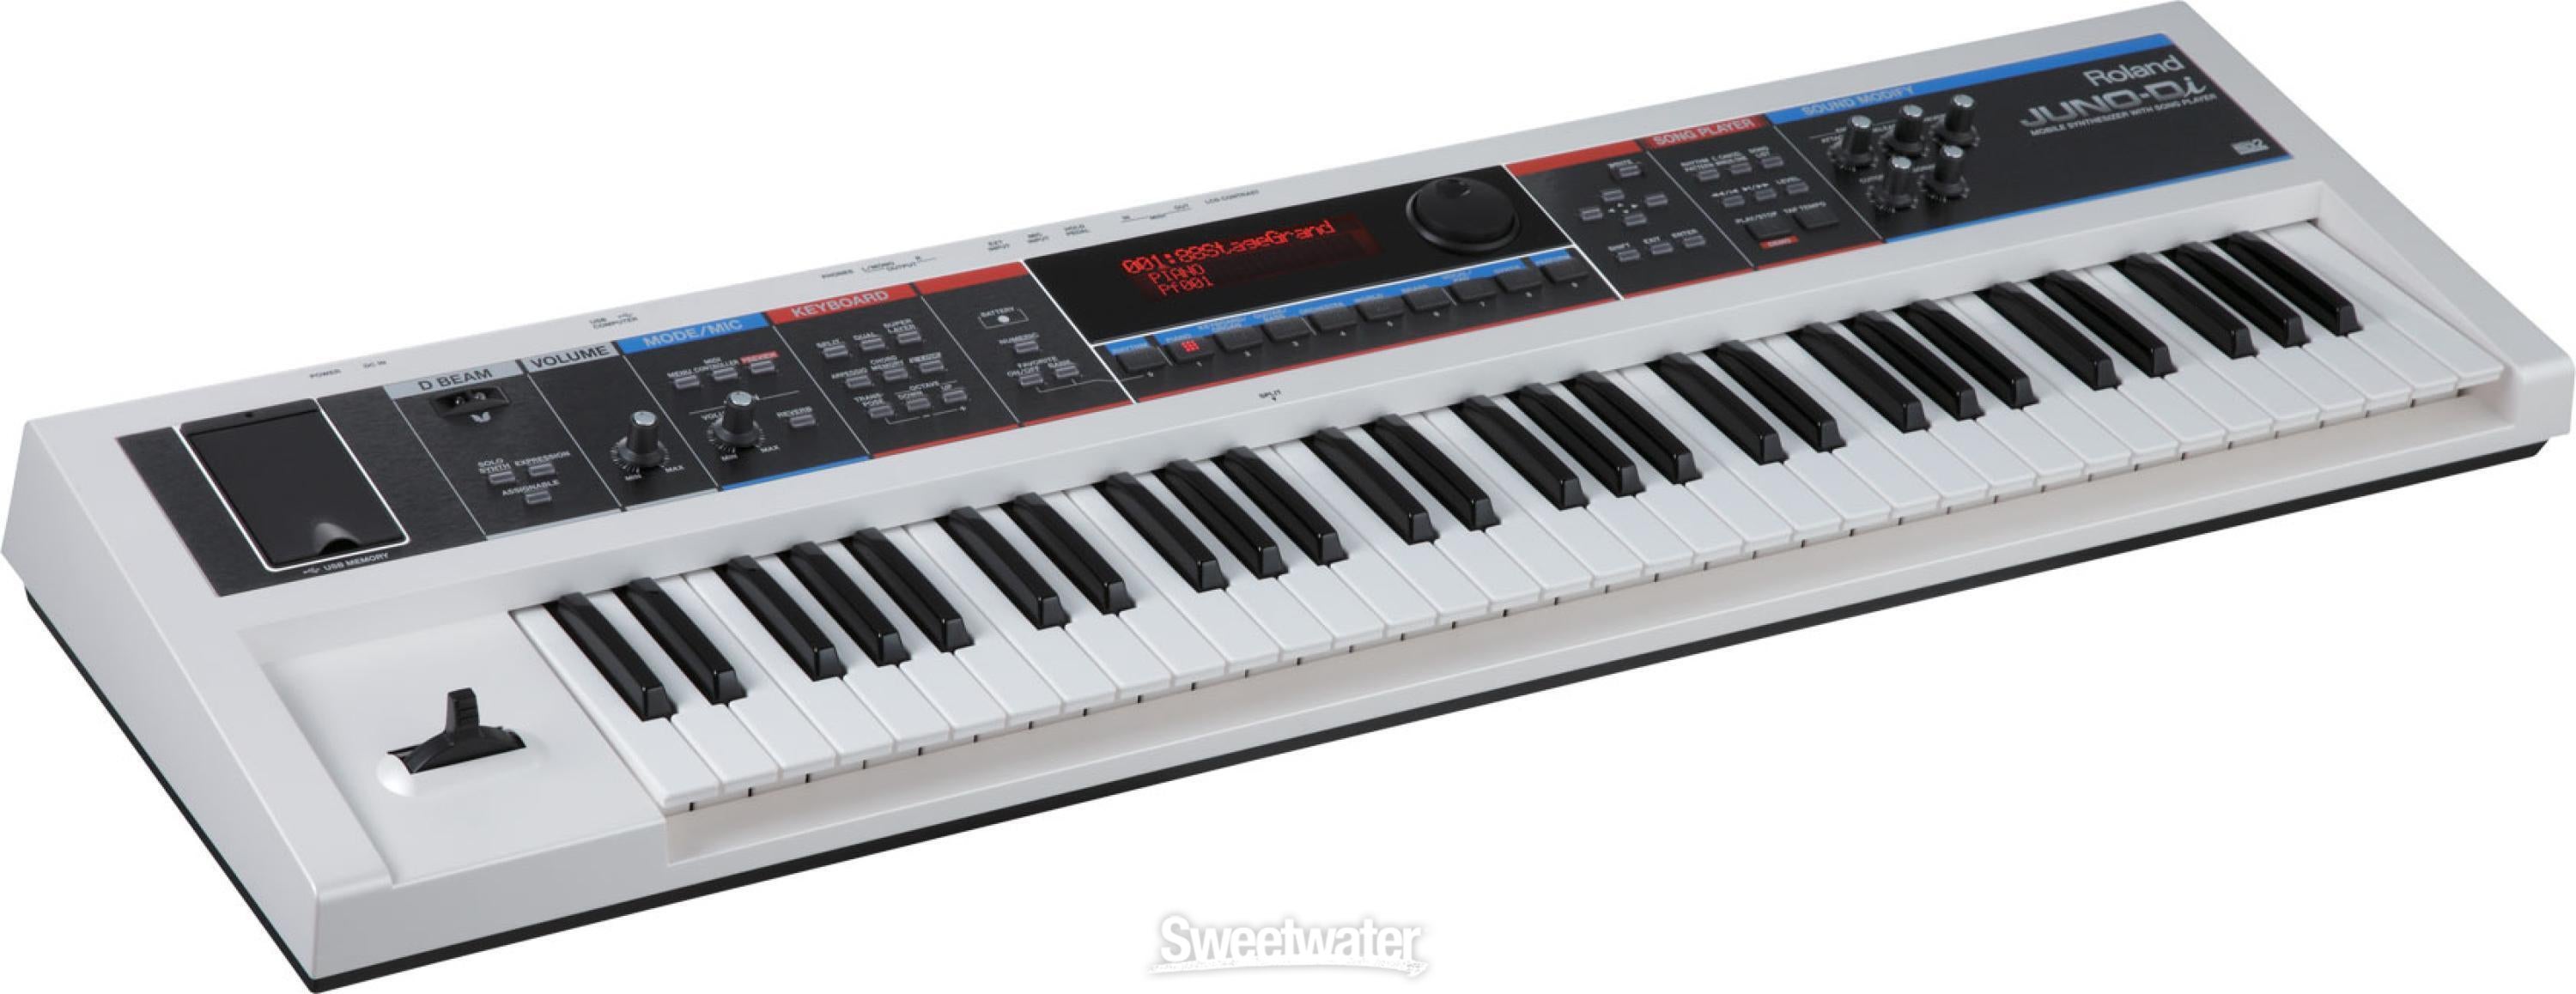 Roland　Sweetwater　JUNO-Di　61-Key　Synthesizer　White